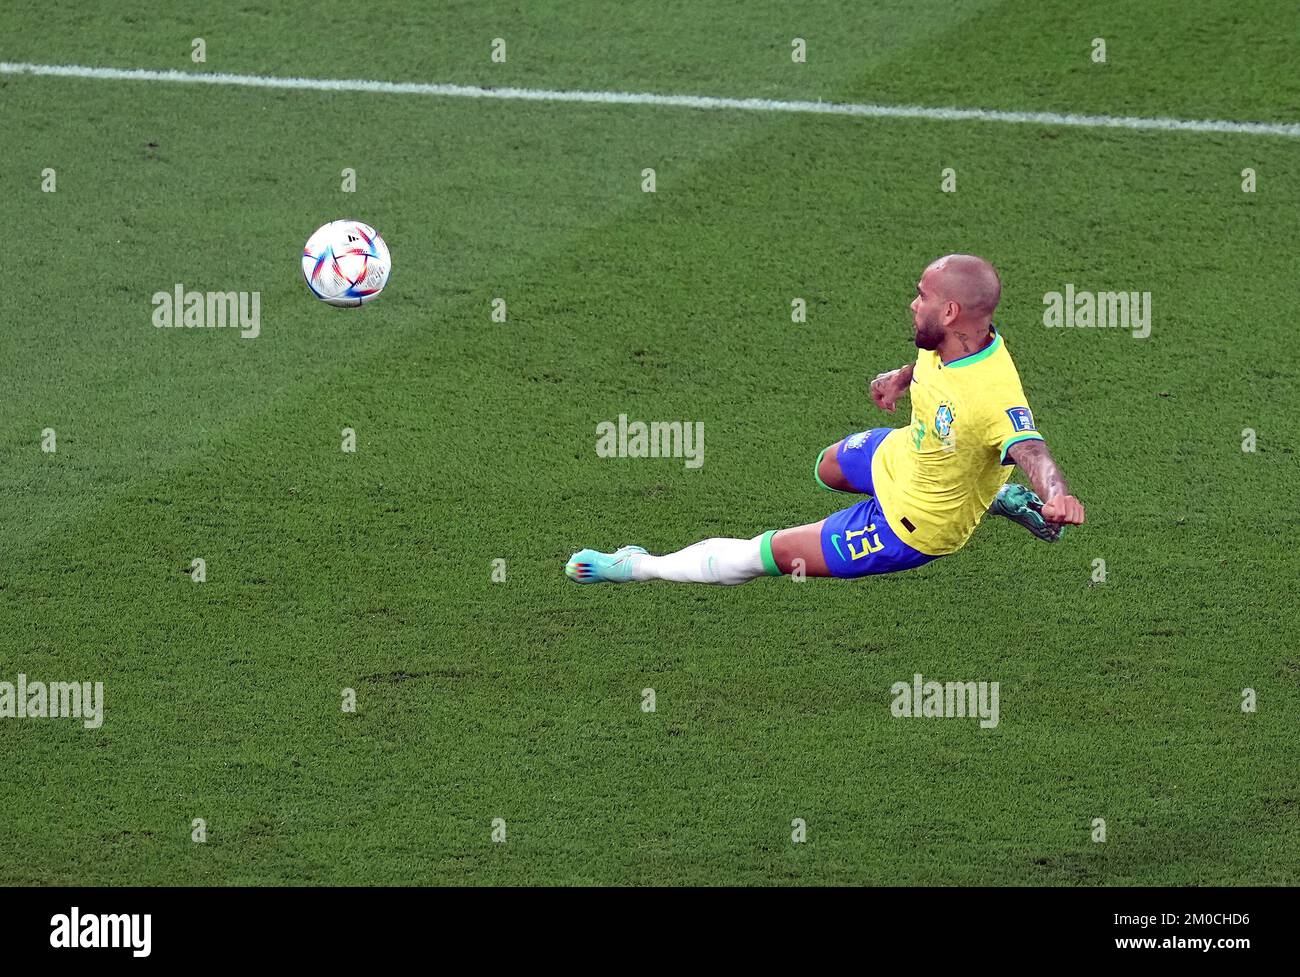 Brazil's Dani Alves attempts a shot on goal during the FIFA World Cup Round of Sixteen match at Stadium 974 in Doha, Qatar. Picture date: Monday December 5, 2022. Stock Photo